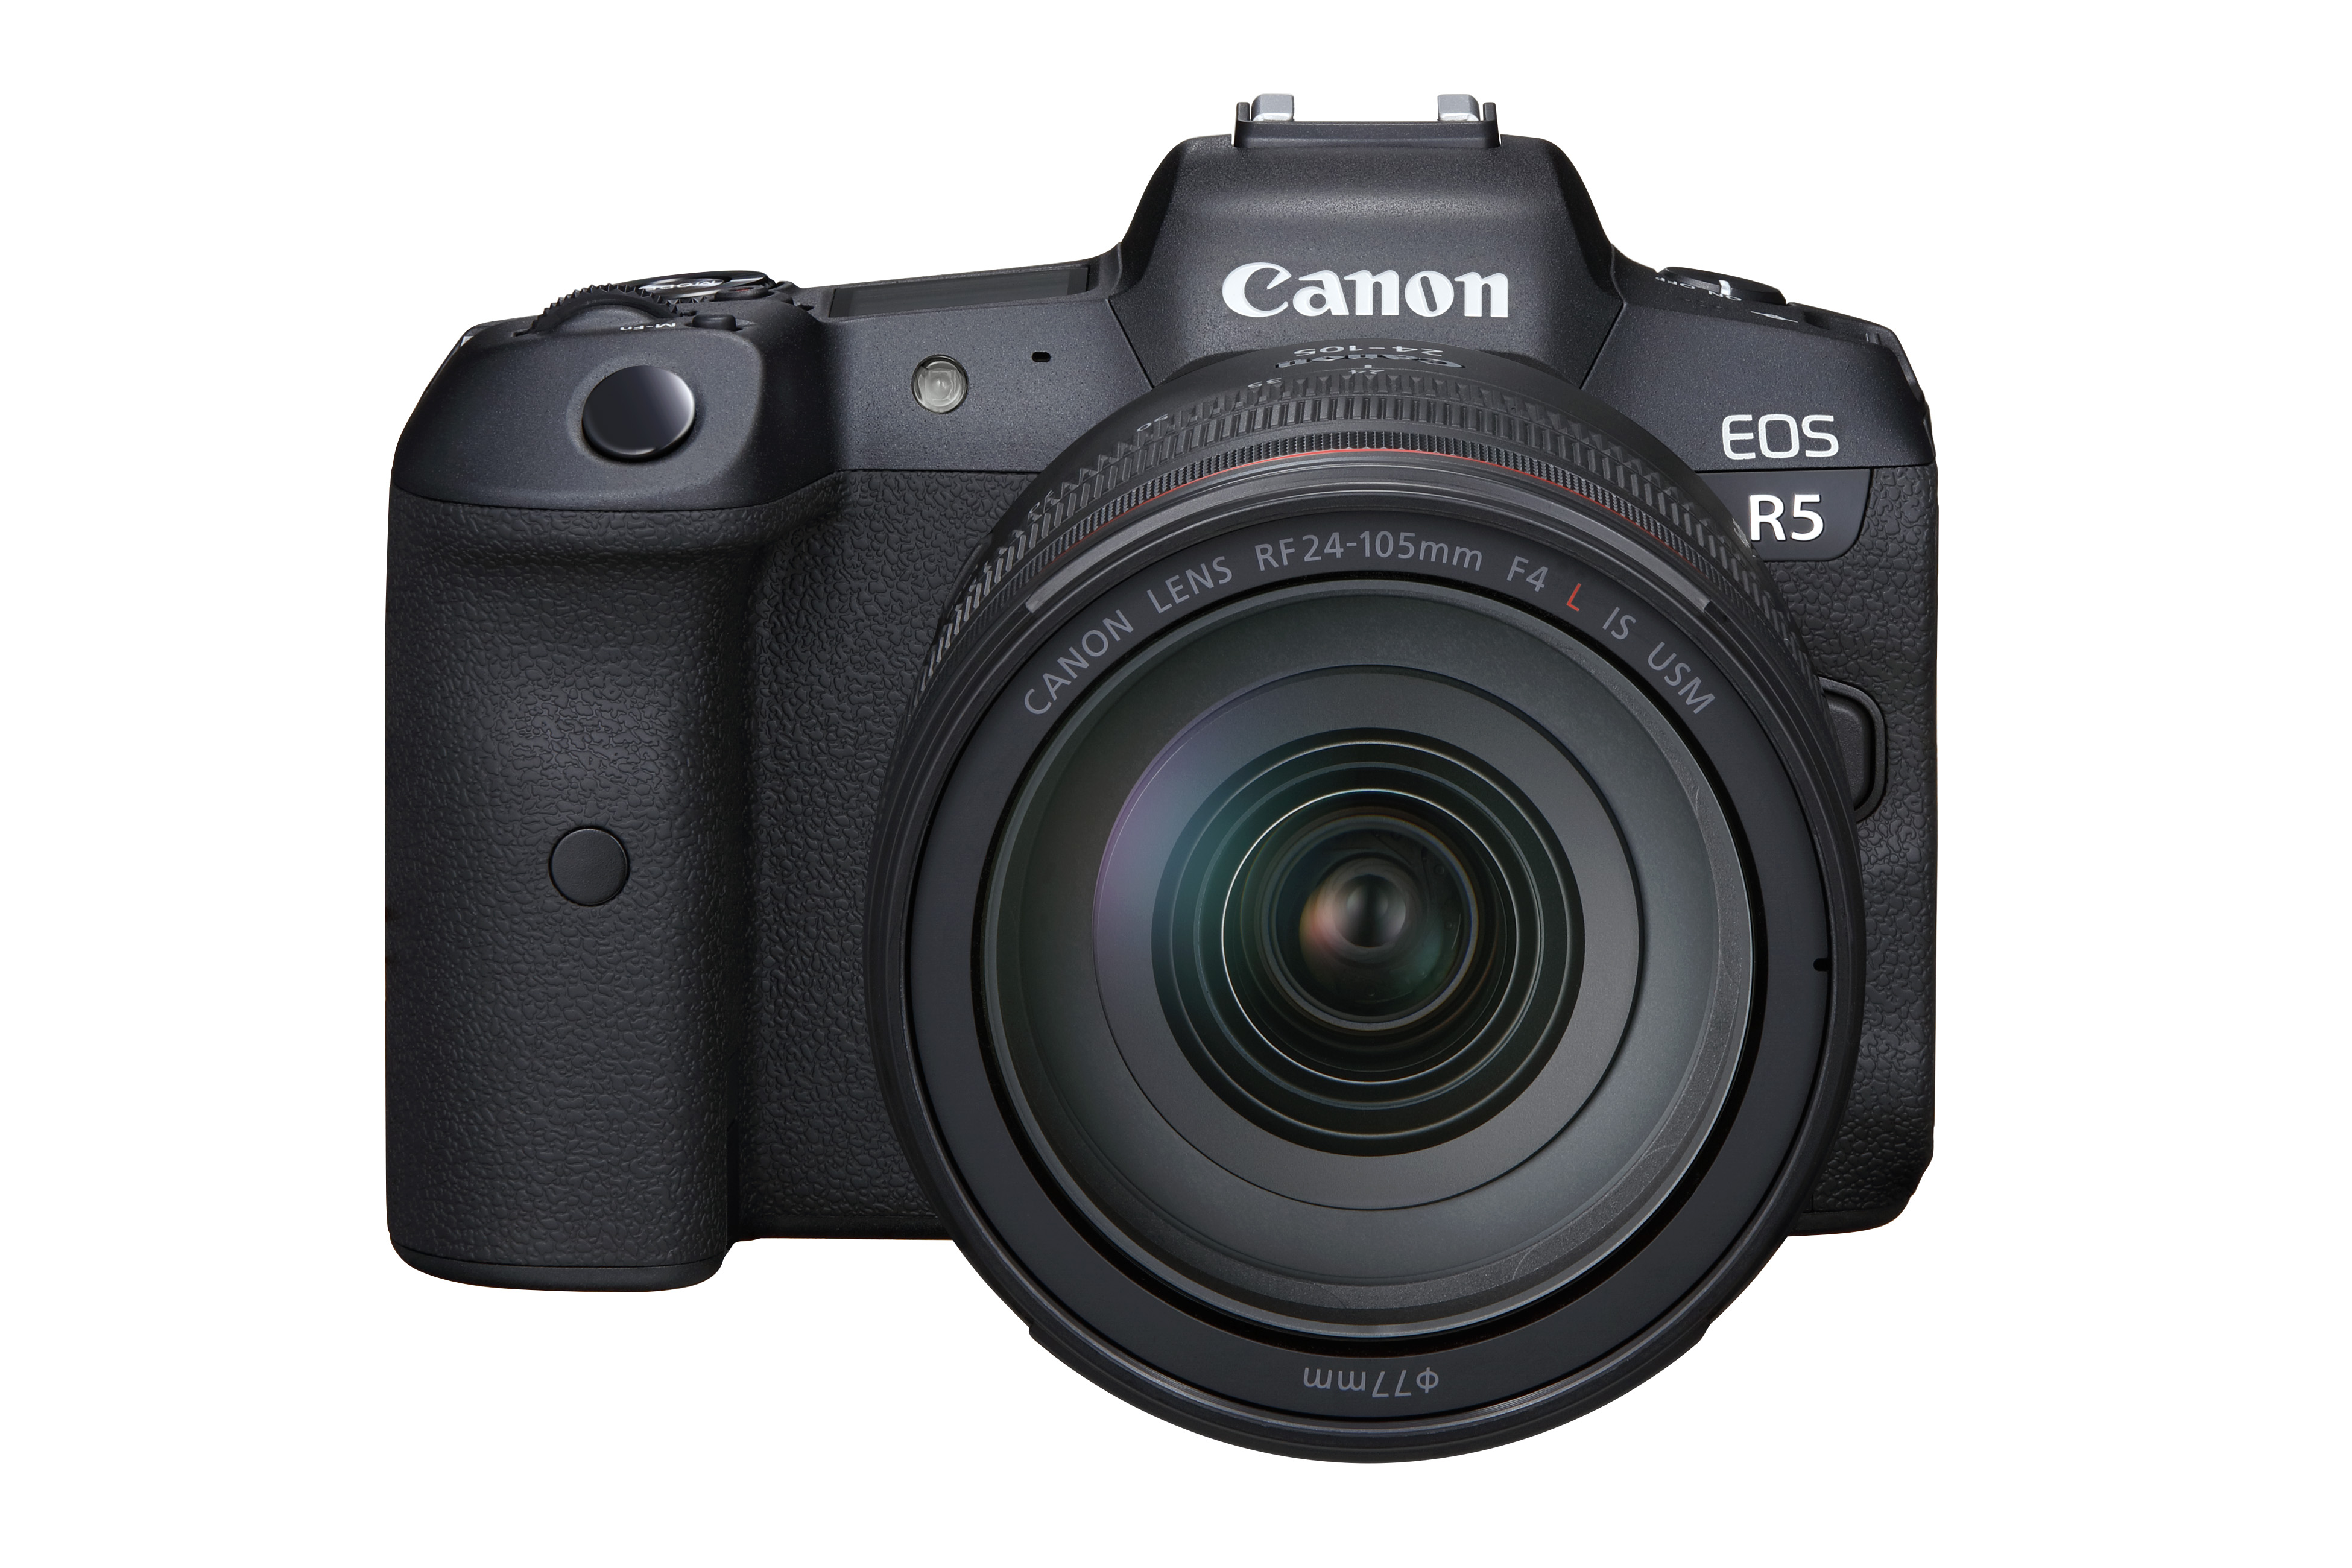 Canon EOS R5 Mirrorless Digital Camera with 24-105mm F4L Wide Angle Zoom Lens 4147C013